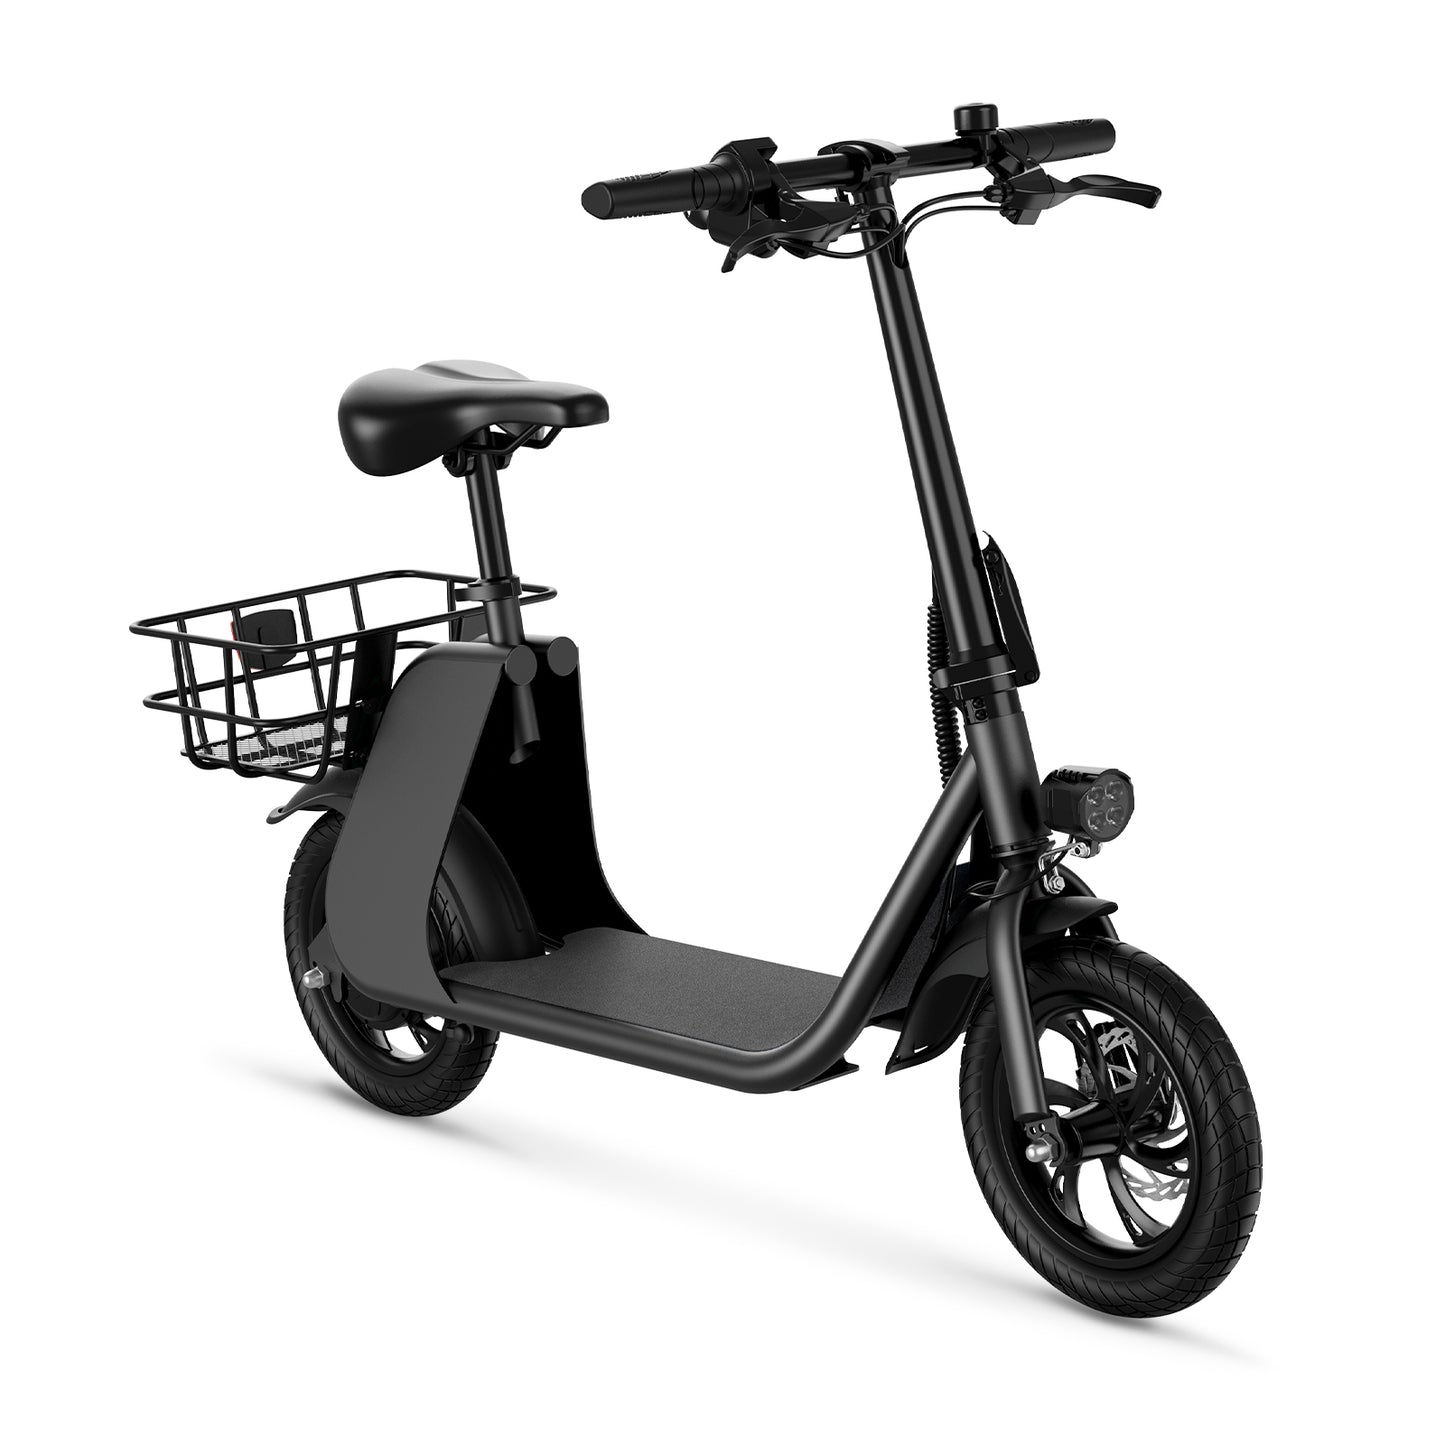 WINDHORSE E Scooter for Adults, Foldable Electric Scooter with Seat & Carry Basket, E Scooter with 450W Motor, 36V 8AH 15.5MPH 20 Miles Commuter E-Scooter, 12.5" Tires Urban E Scooter, Black